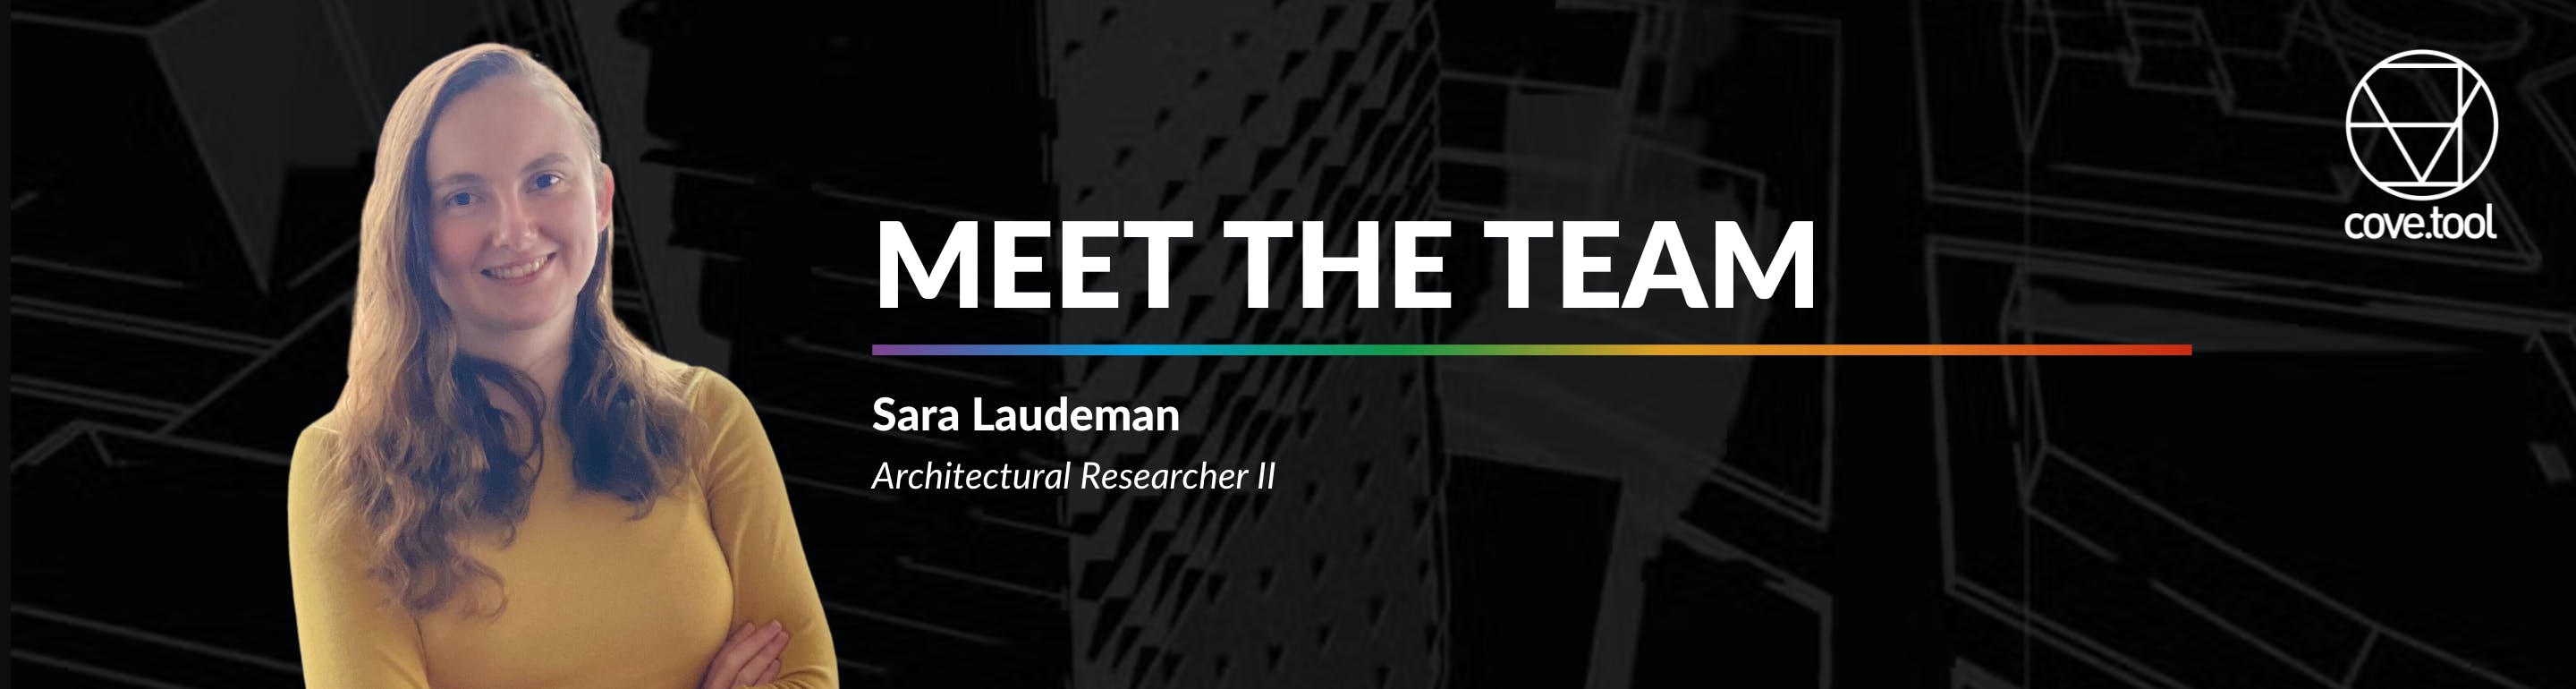 Meet one of our talented team members, Sara Laudeman, cove.tool's Architectural Researcher II.